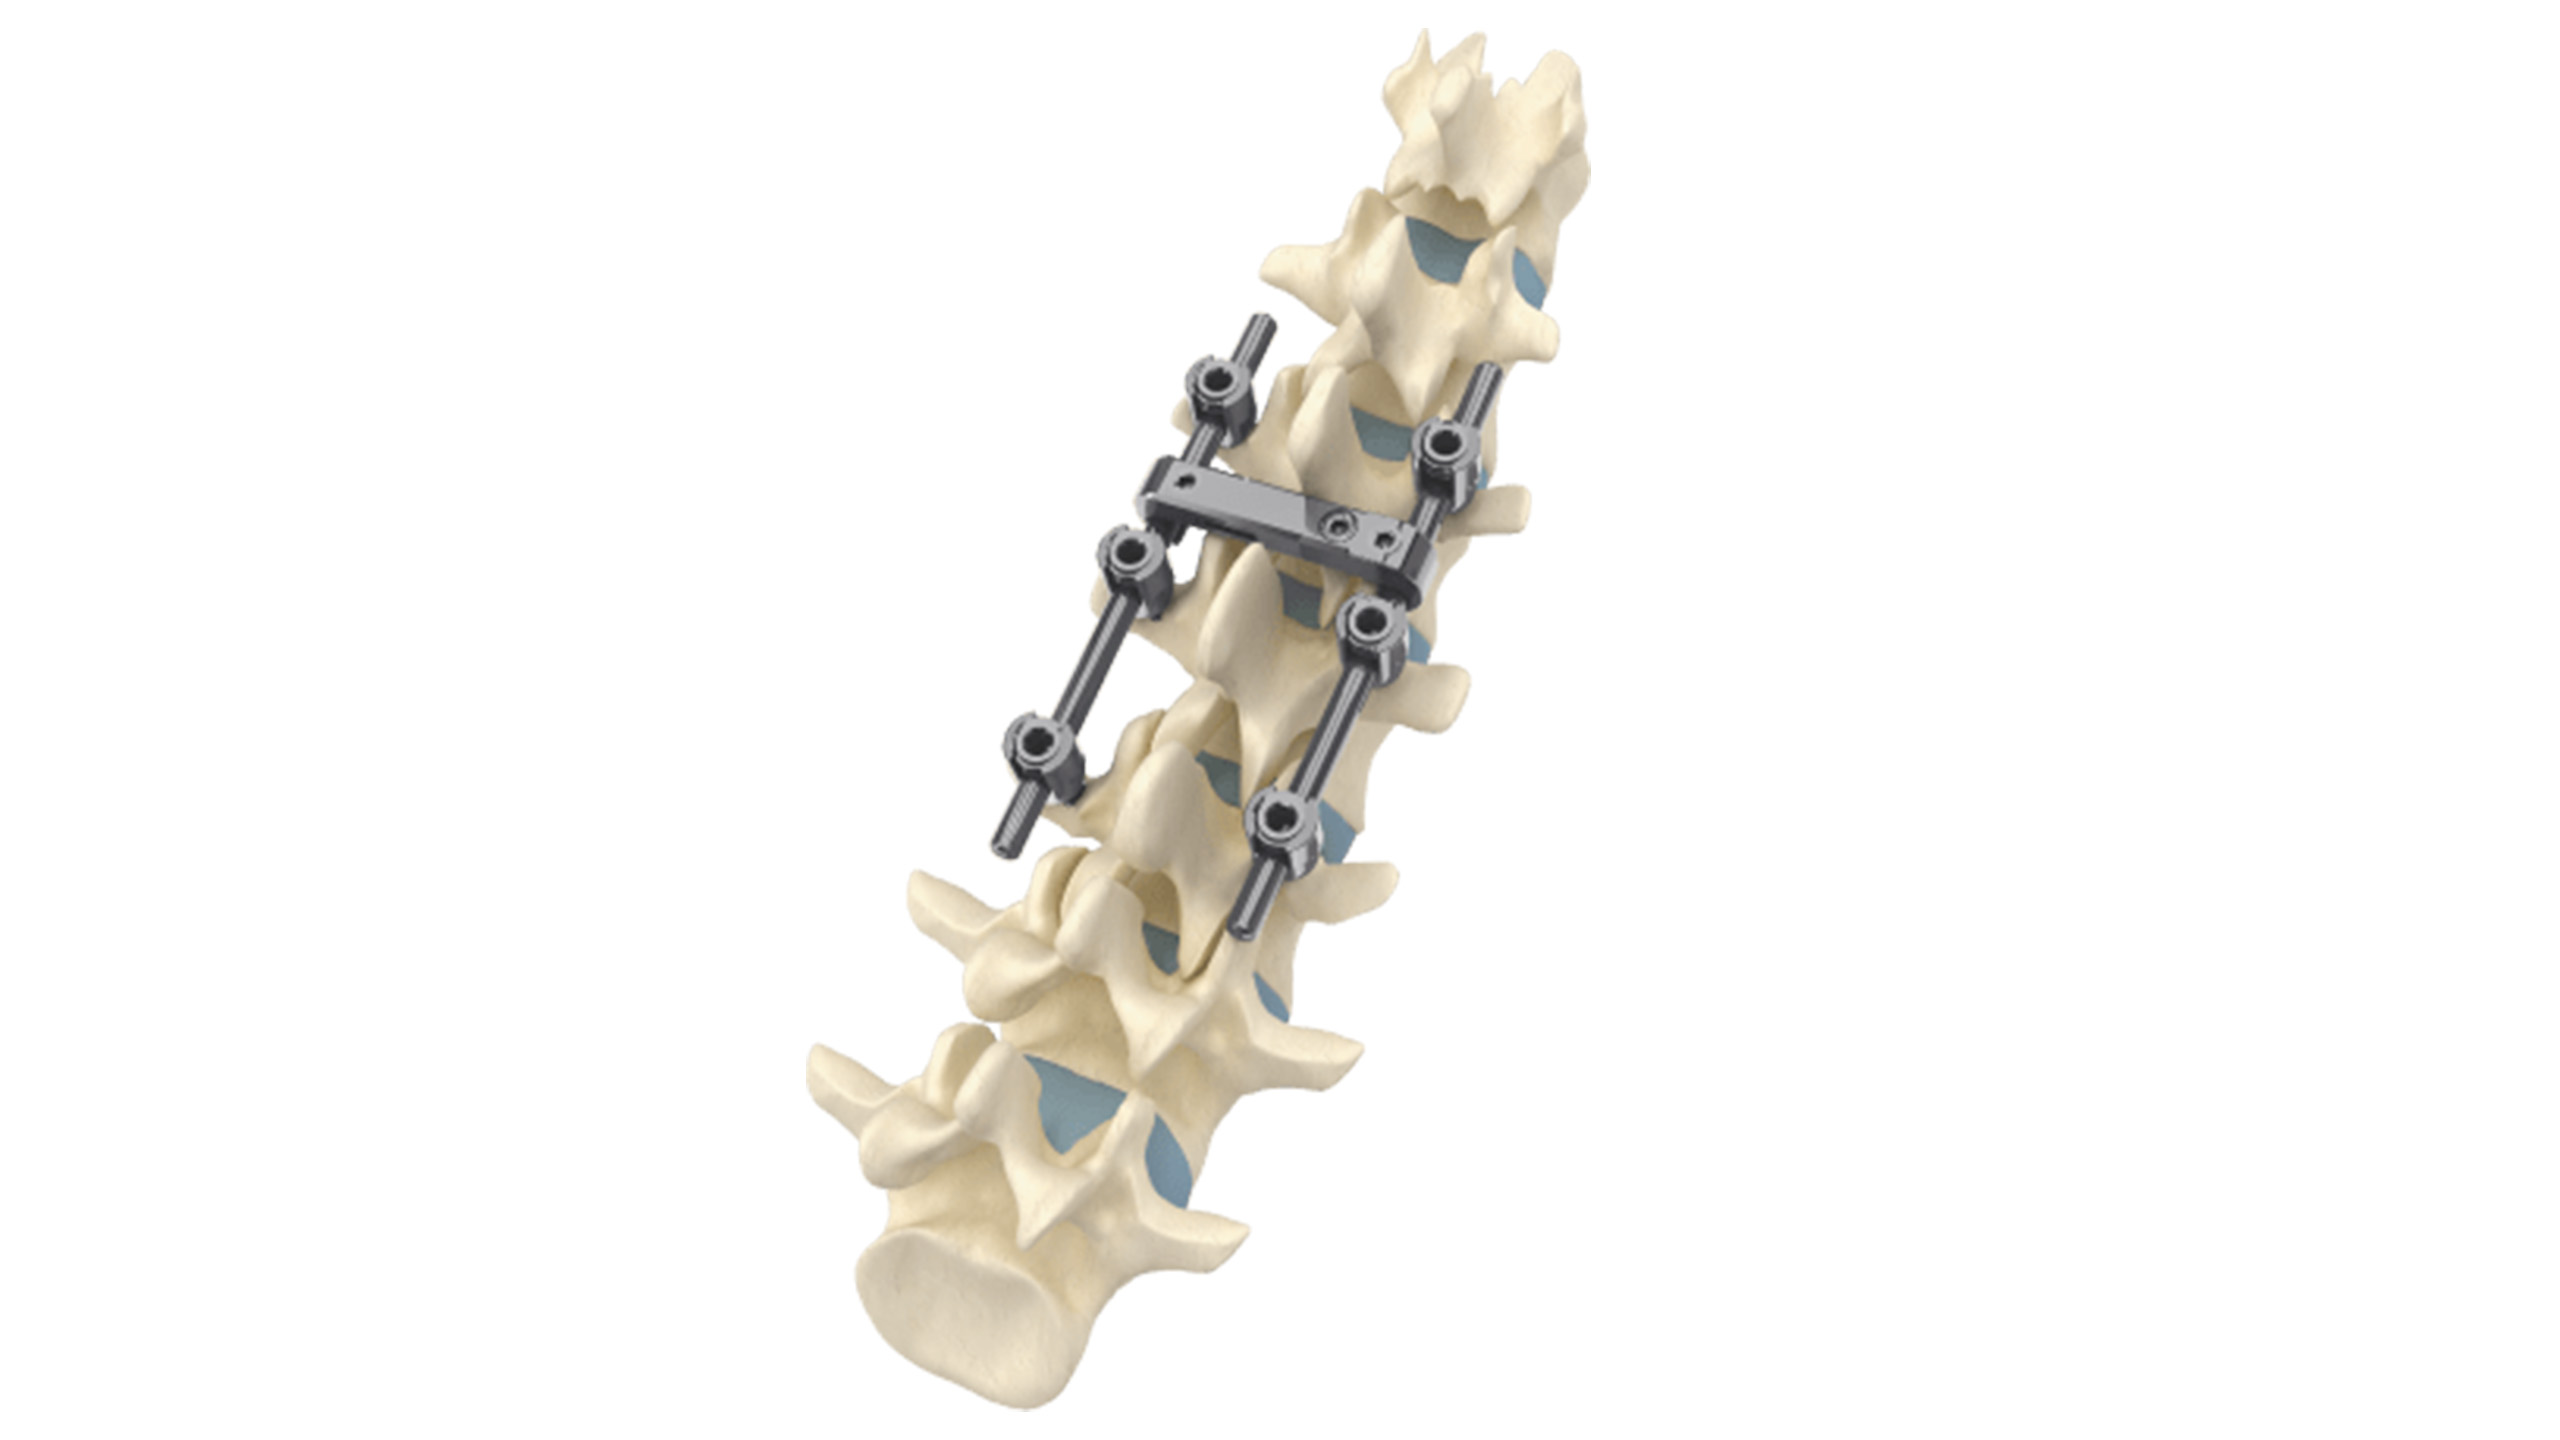 Pedicle Screw Spinal Fixation System